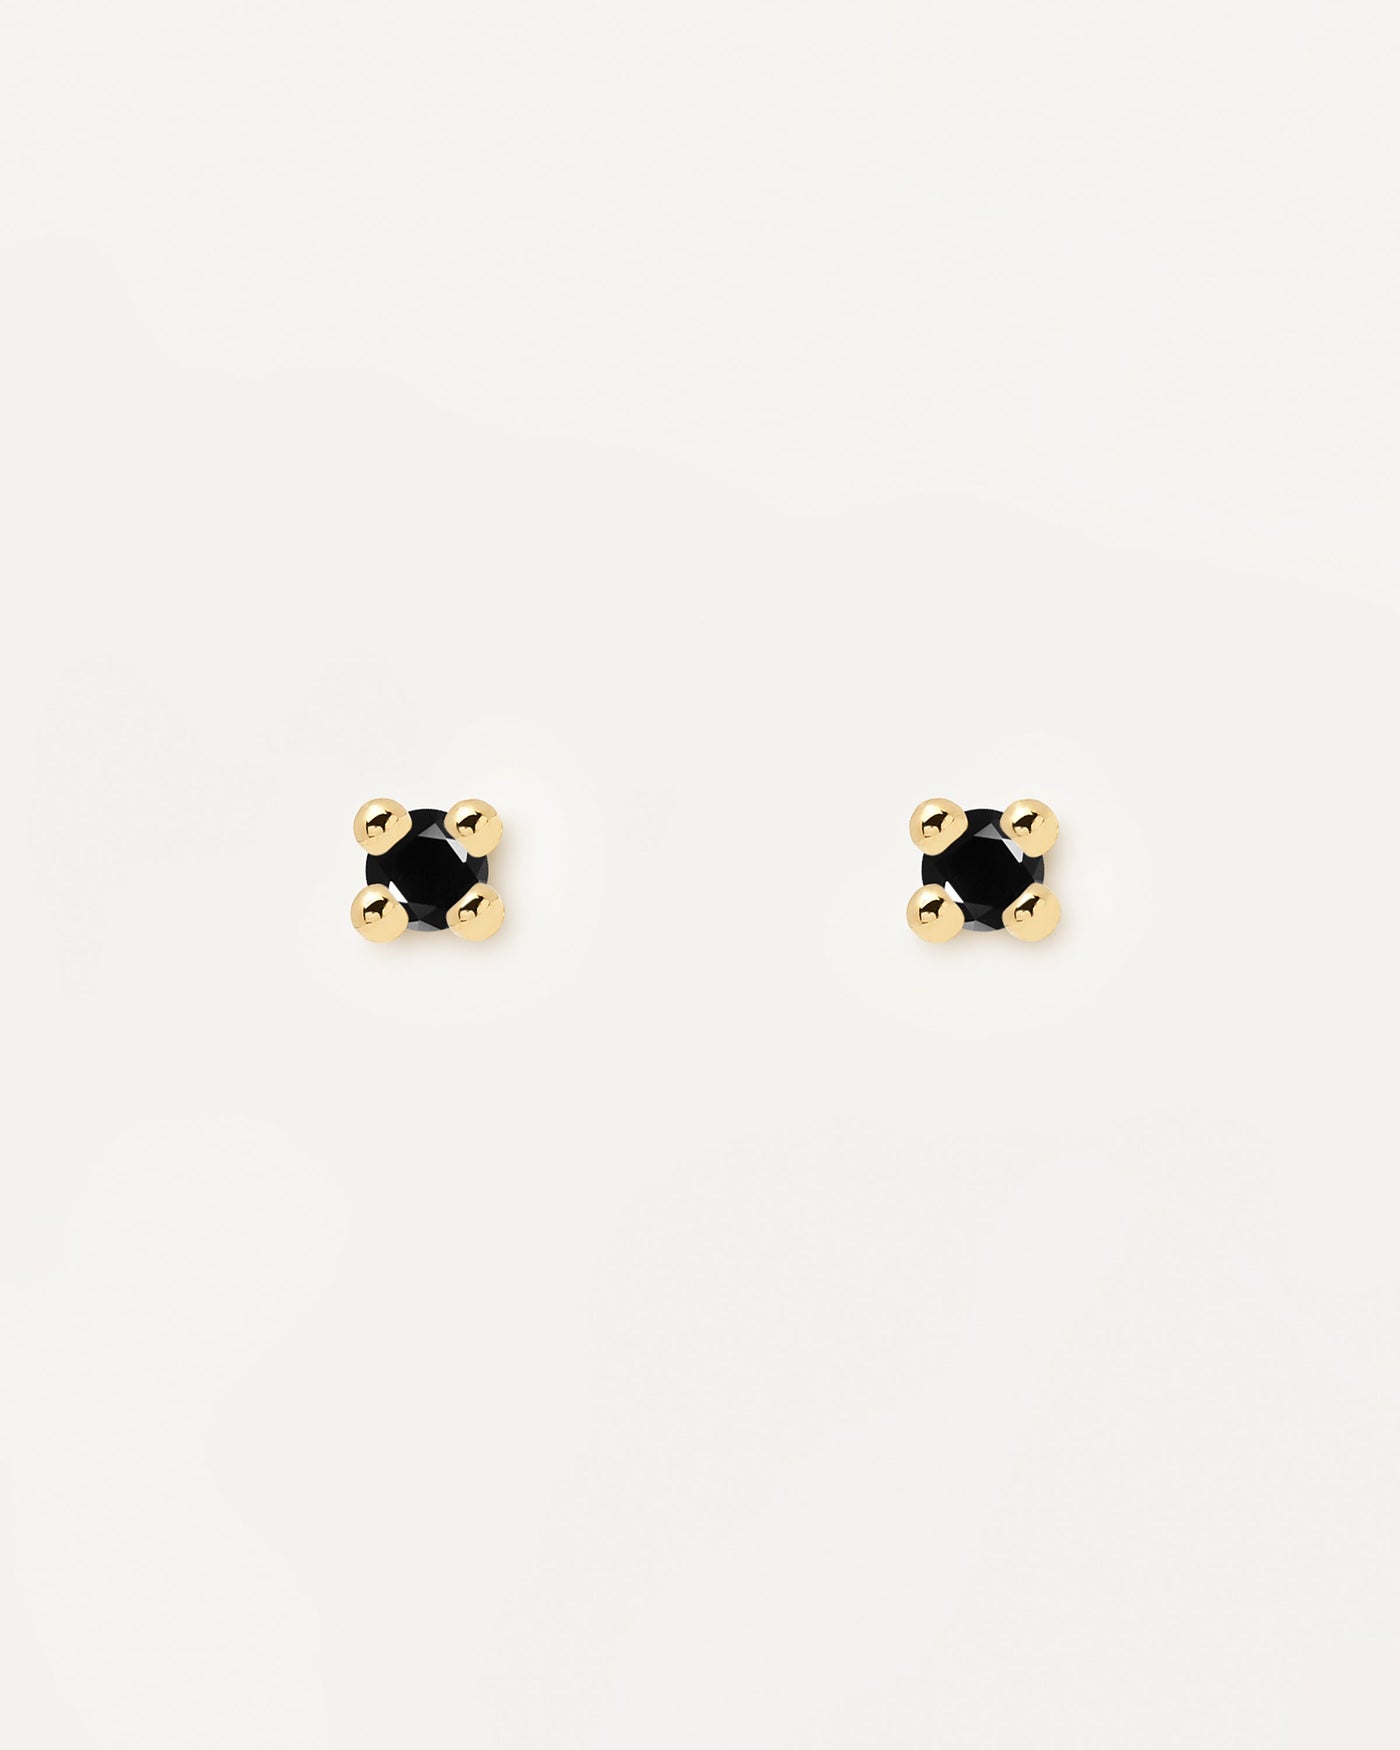 2023 Selection | Black Essentia Earrings. 18k gold plated silver stud earrings with a cut black zirconia . Get the latest arrival from PDPAOLA. Place your order safely and get this Best Seller. Free Shipping.